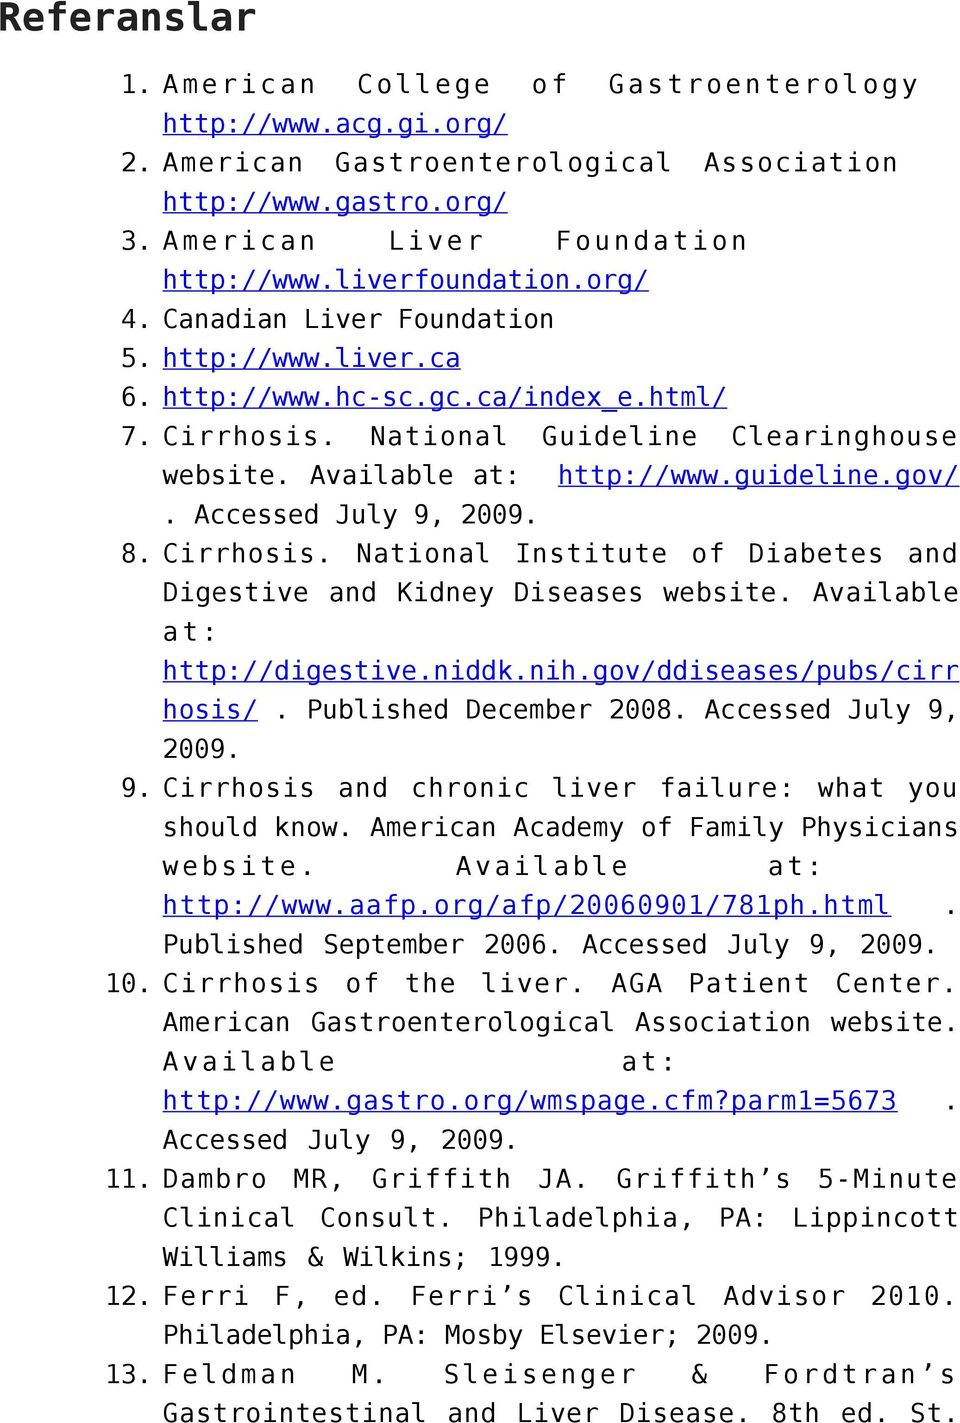 Accessed July 9, 2009. 8. Cirrhosis. National Institute of Diabetes and Digestive and Kidney Diseases website. Available at: http://digestive.niddk.nih.gov/ddiseases/pubs/cirr hosis/.